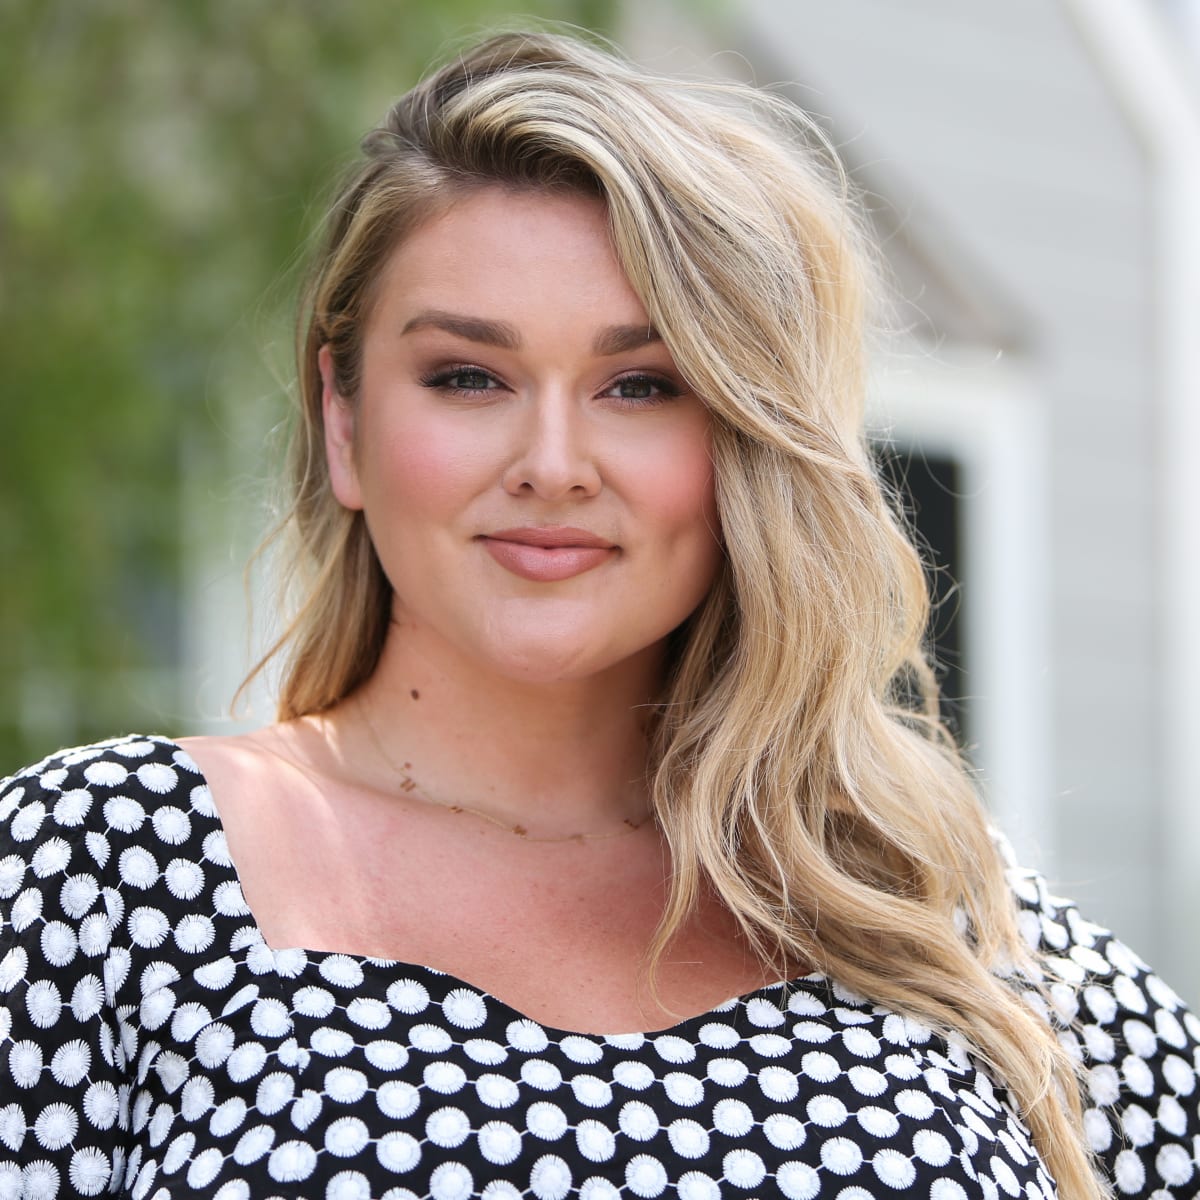 Huntermcgrady Xxx Hd - Look: Hunter McGrady's Top SI Swimsuit Photos - The Spun: What's Trending  In The Sports World Today